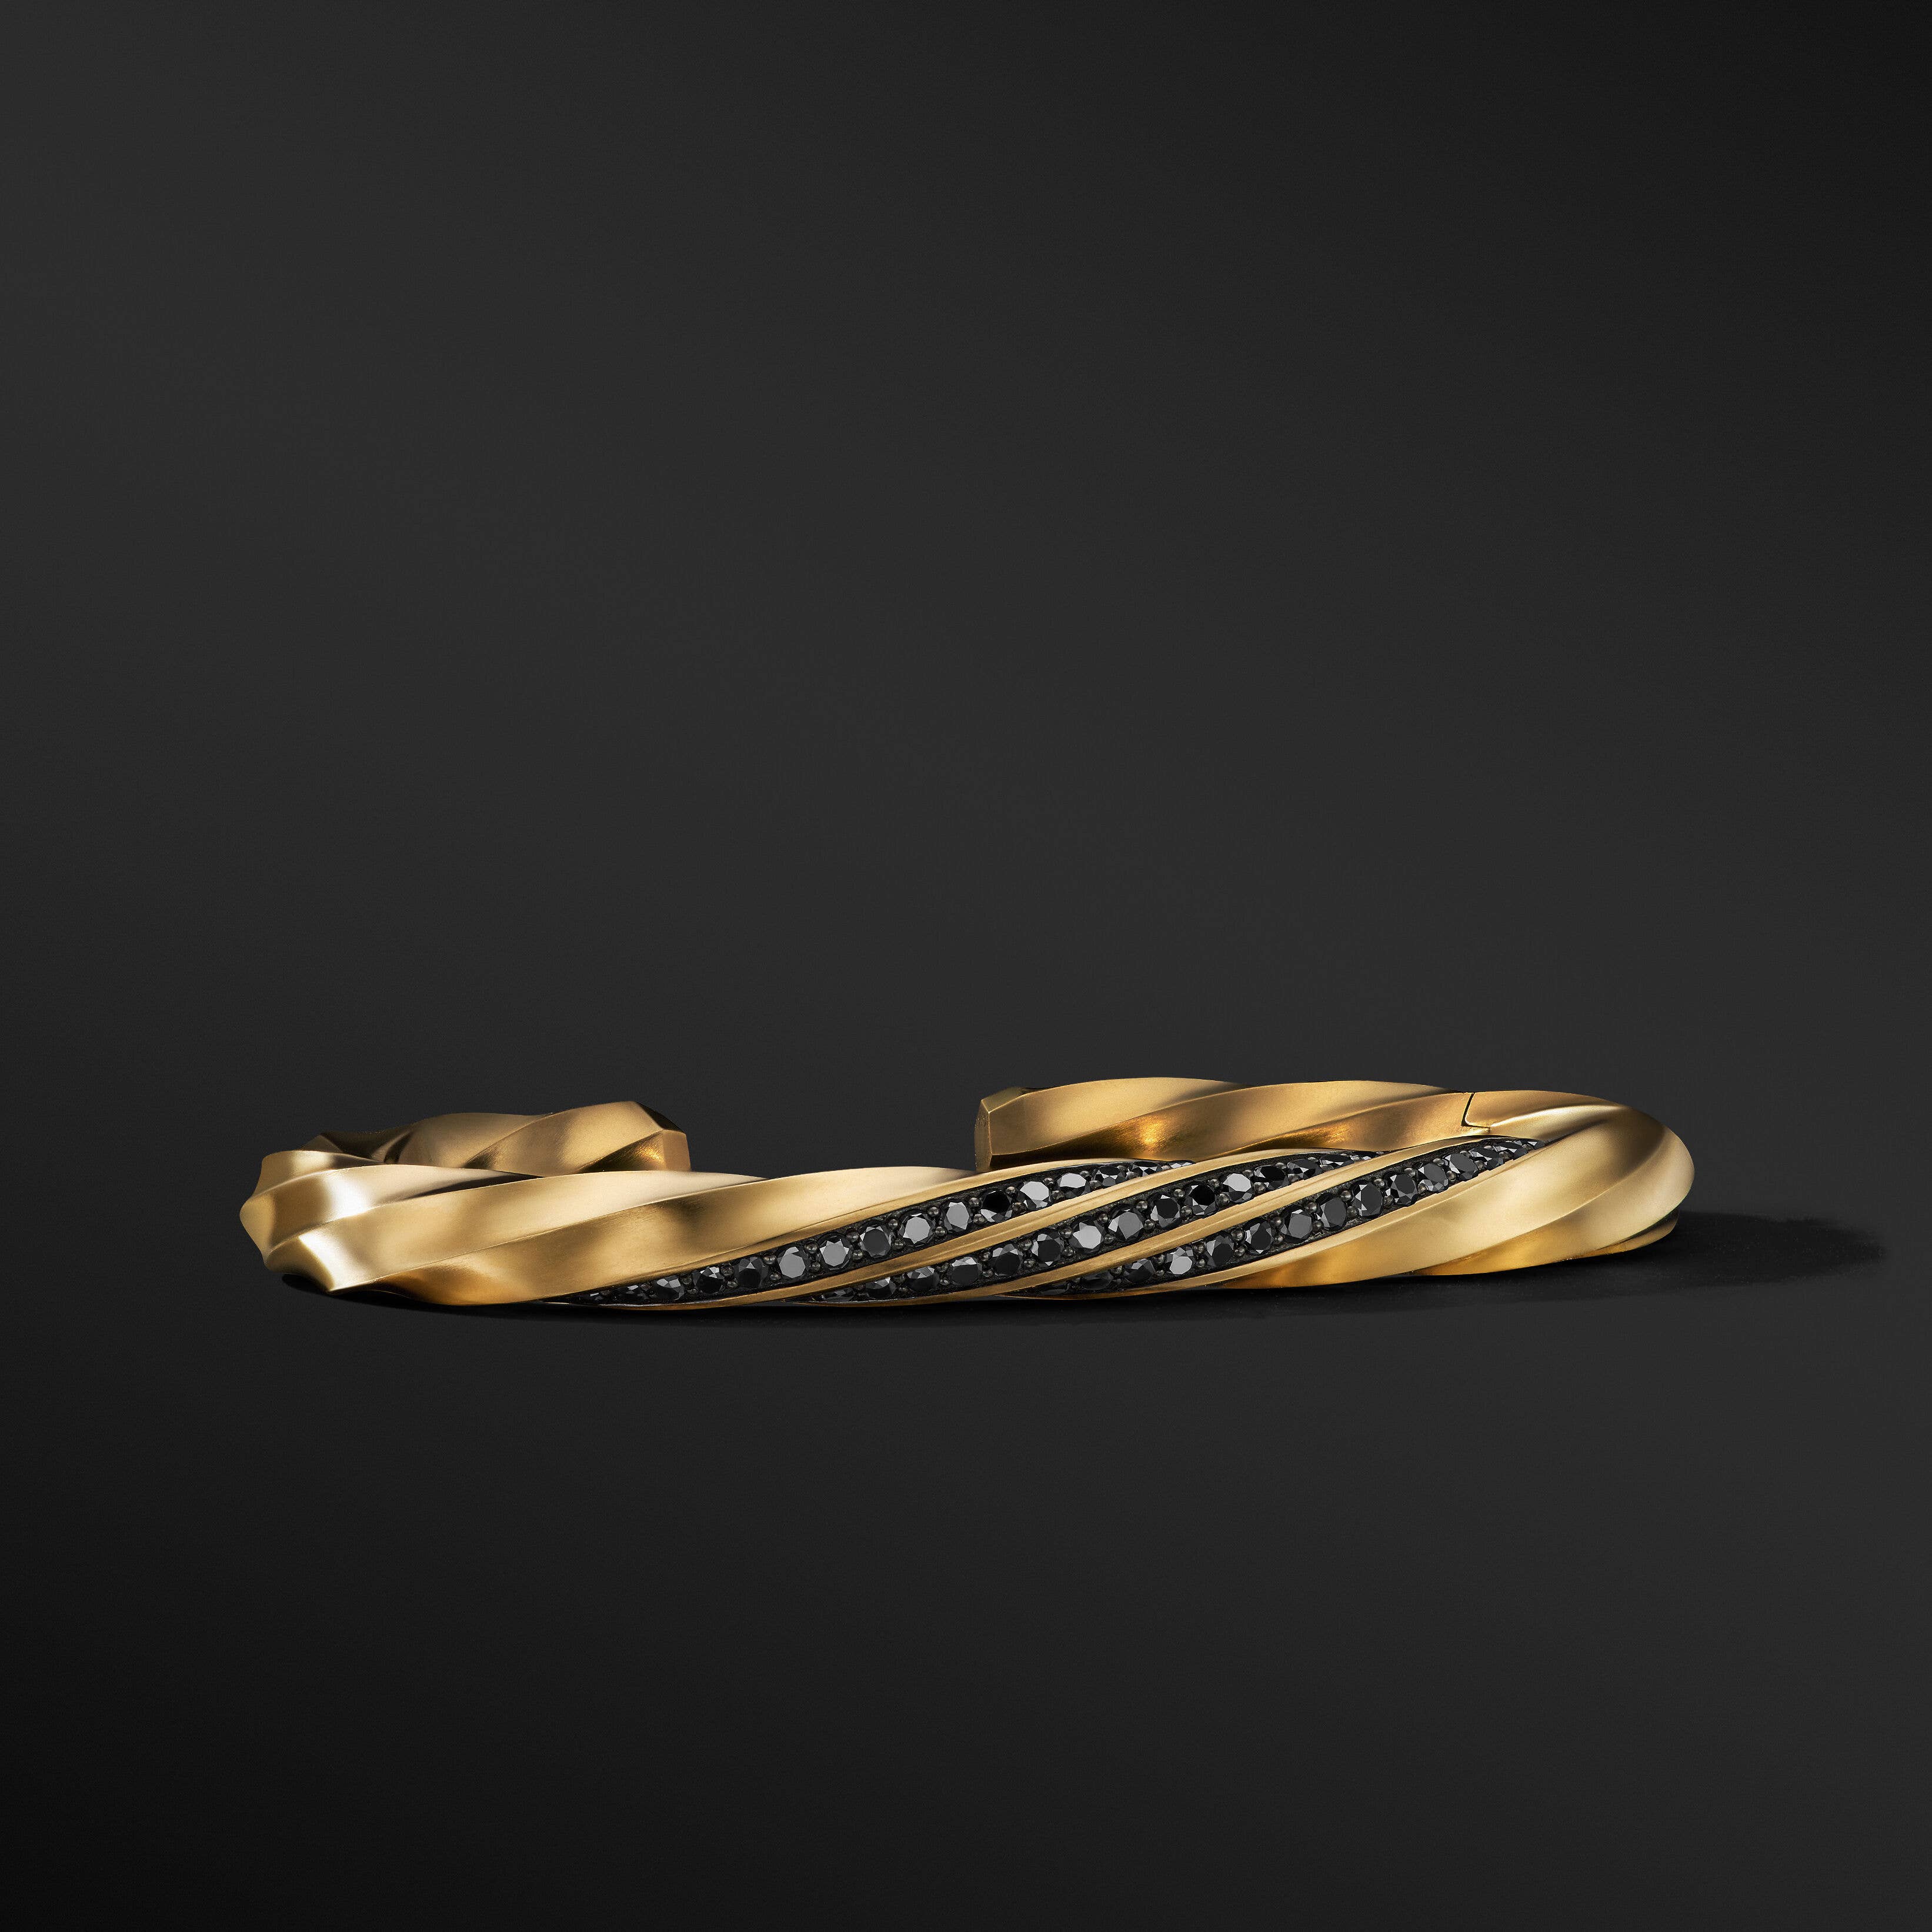 Cable Edge Cuff Bracelet in Recycled 18K Yellow Gold, 8mm